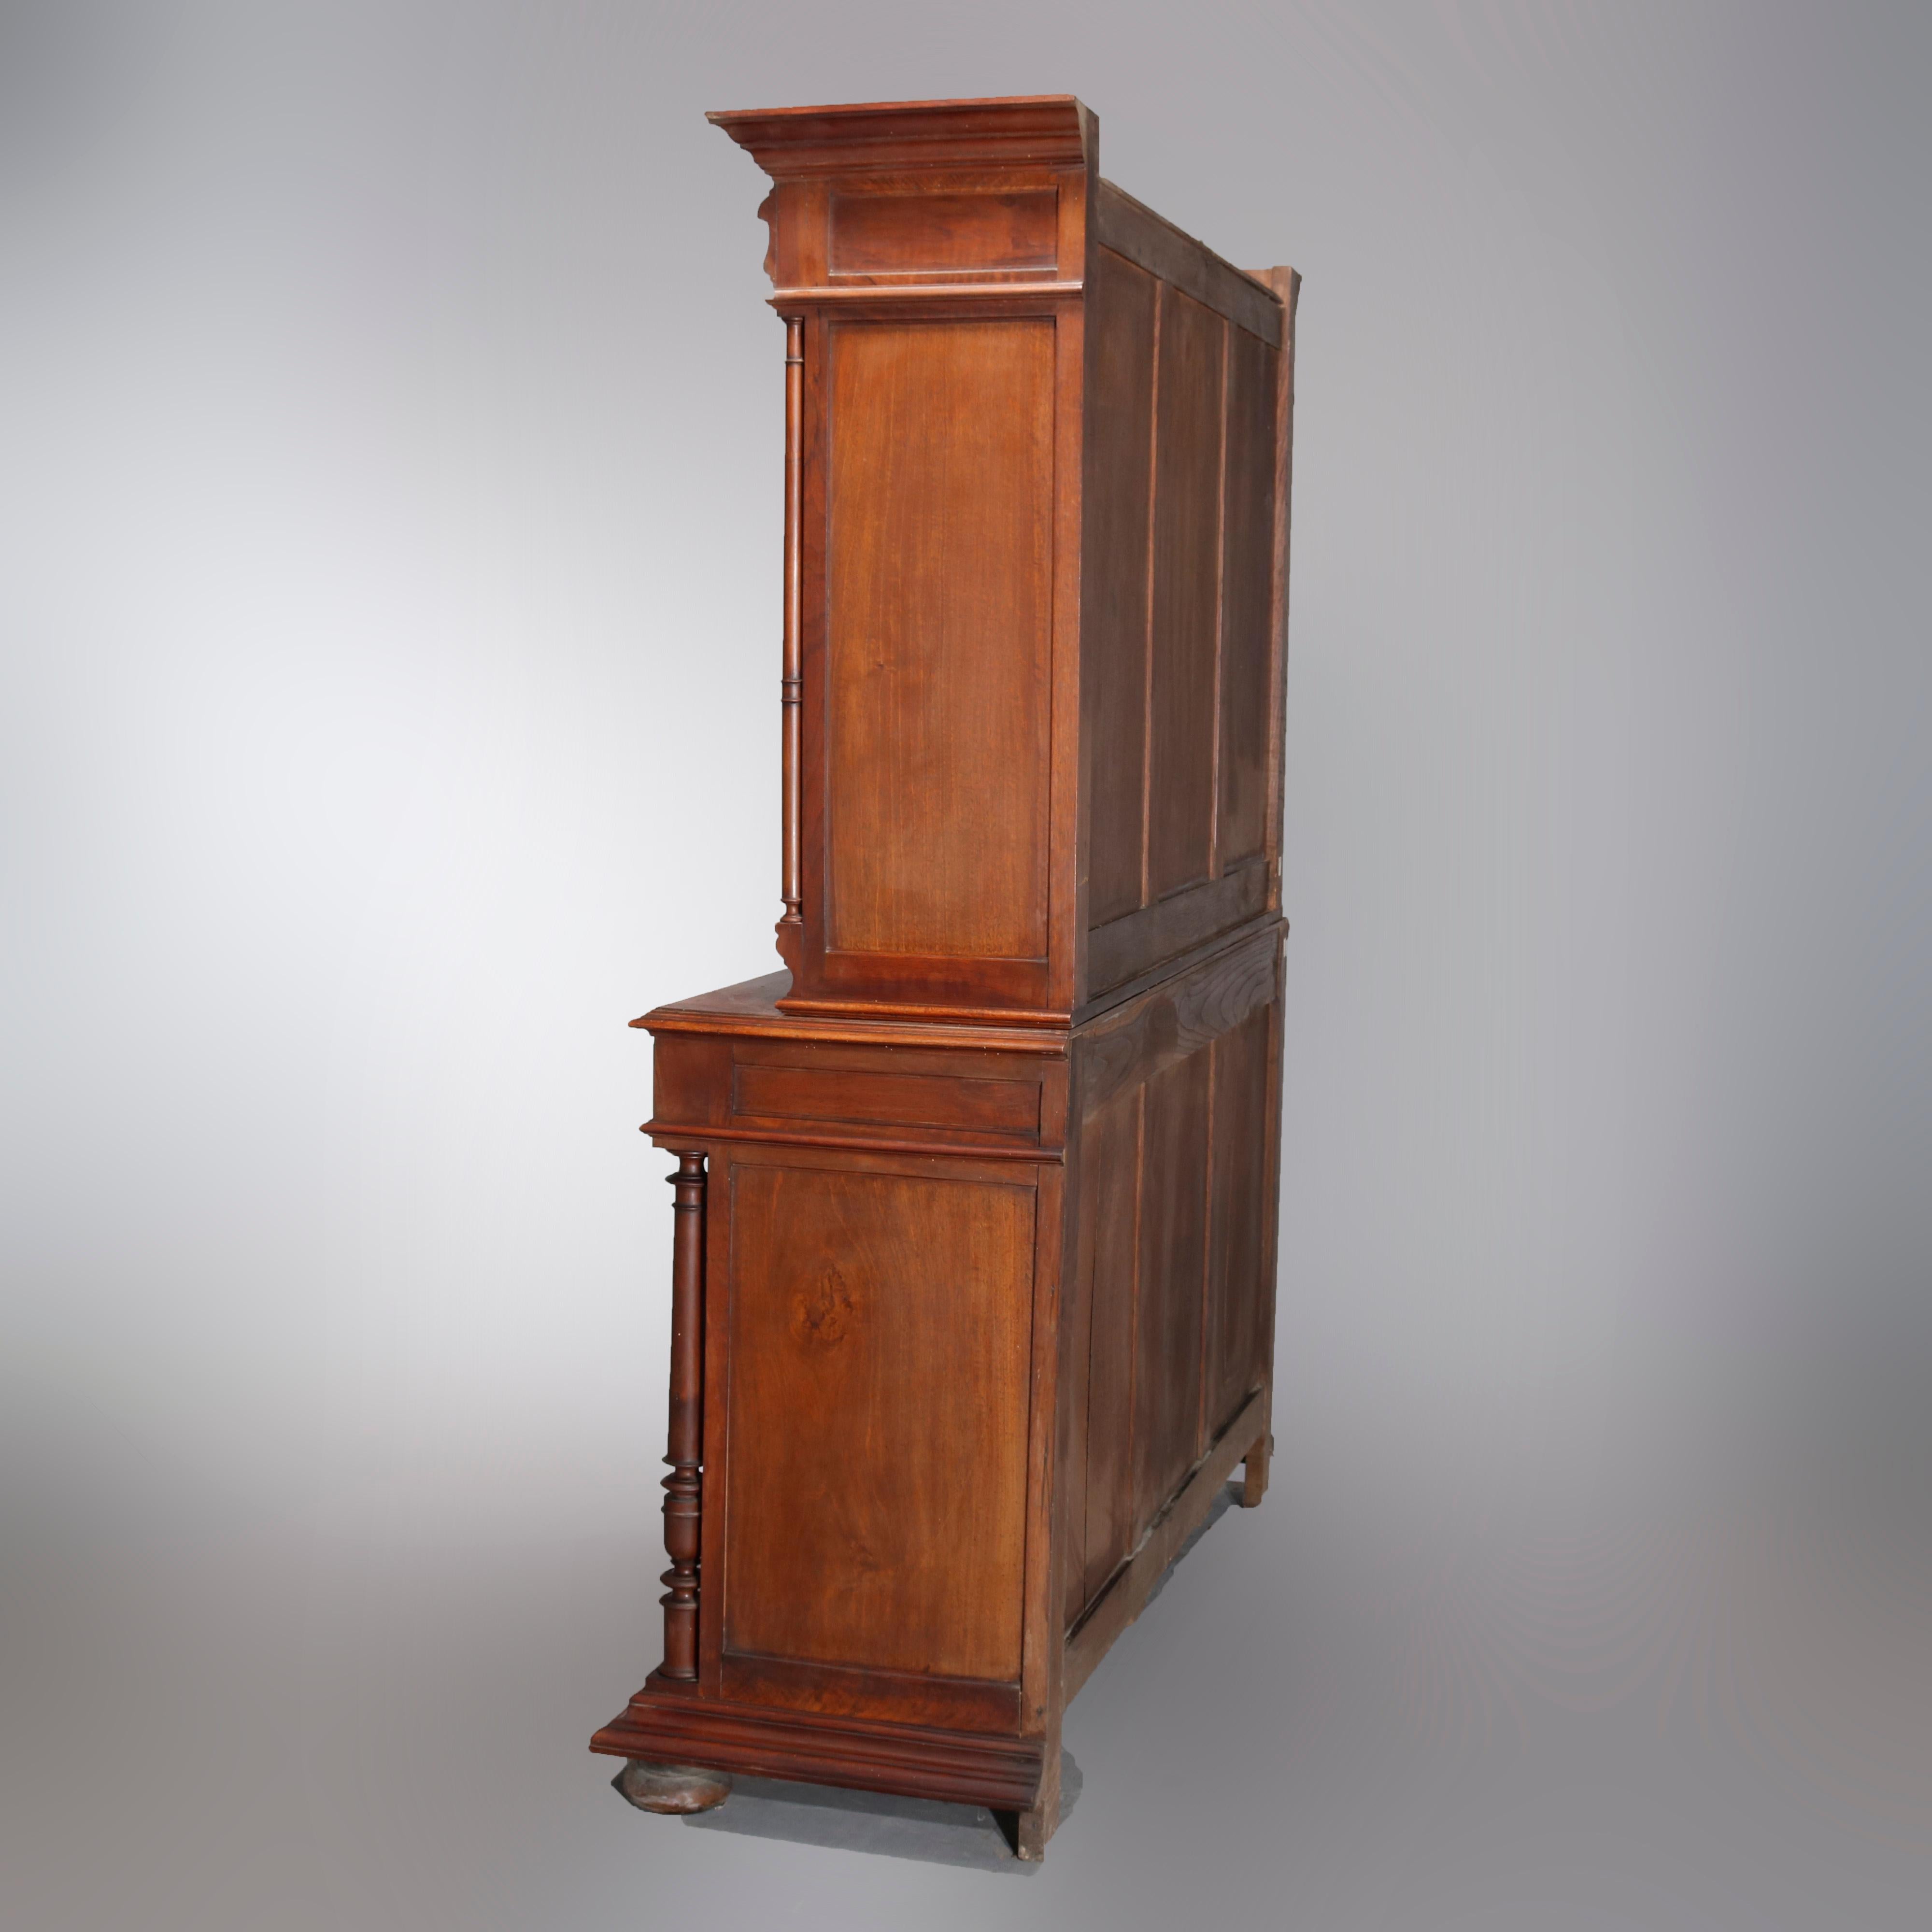 Antique French Renaissance carved mahogany step-back court cupboard with upper having triple paneled door flanked by full turned columns, surmounting lower with double reeded doors and double doors with geometric elements flanked by full turned